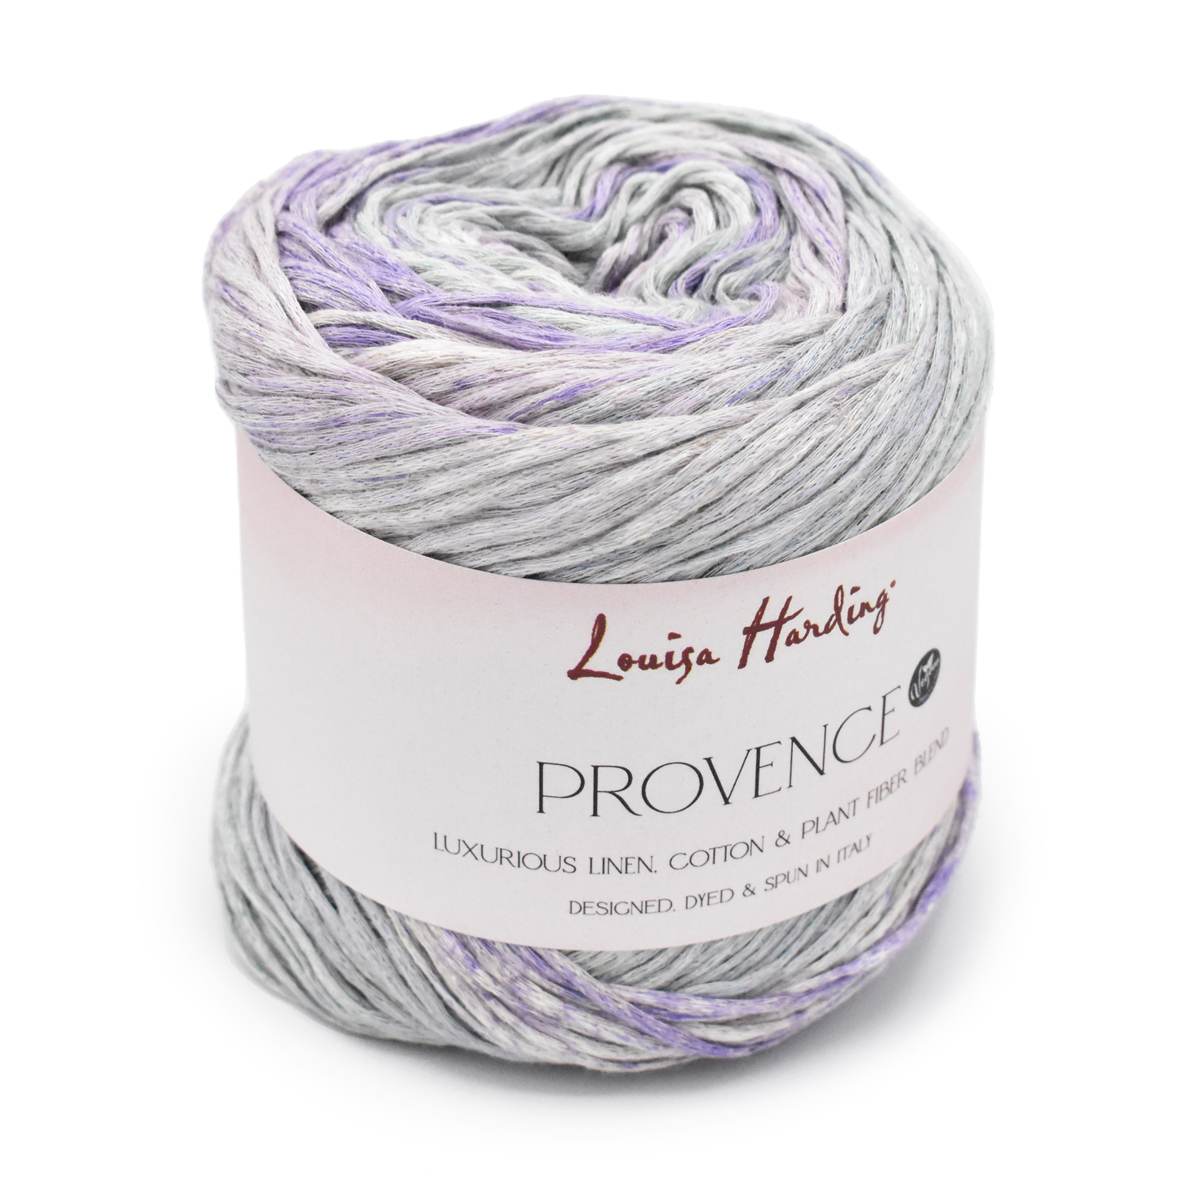 a skein of Provence